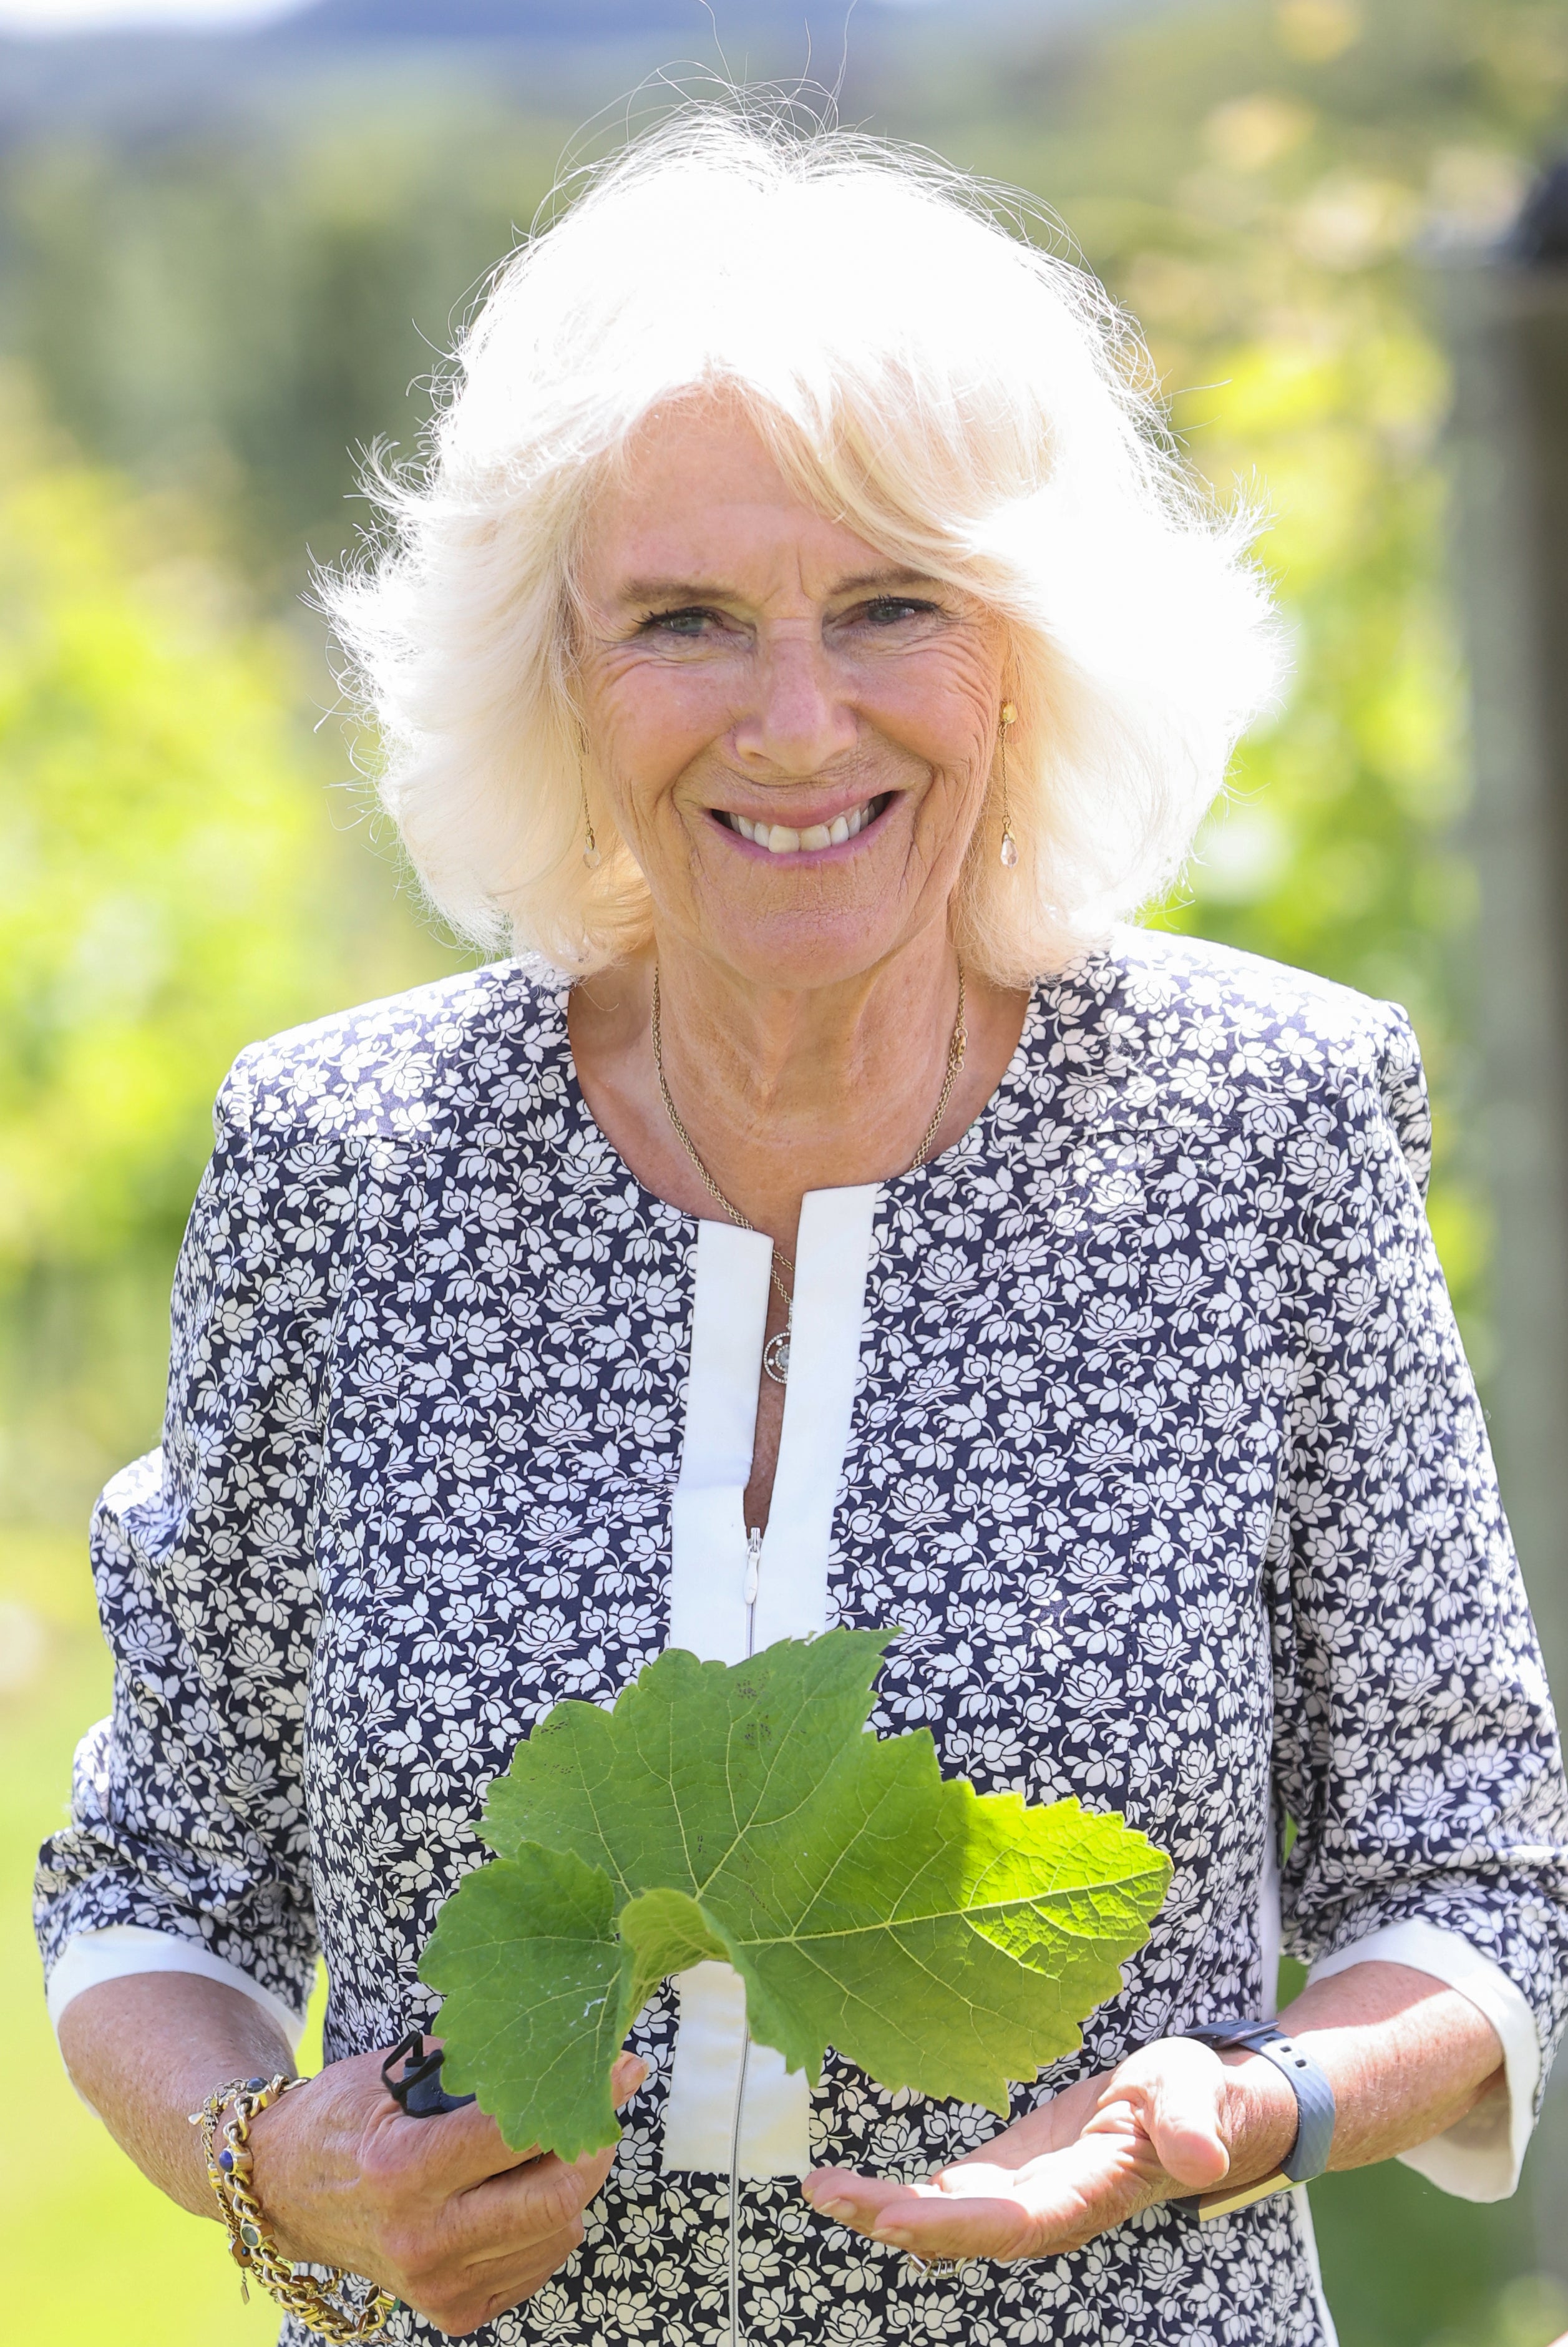 The Duchess of Cornwall, president of Wine GB, during a visit to Llanerch Vineyard in Pontyclun (Chris Jackson/PA)